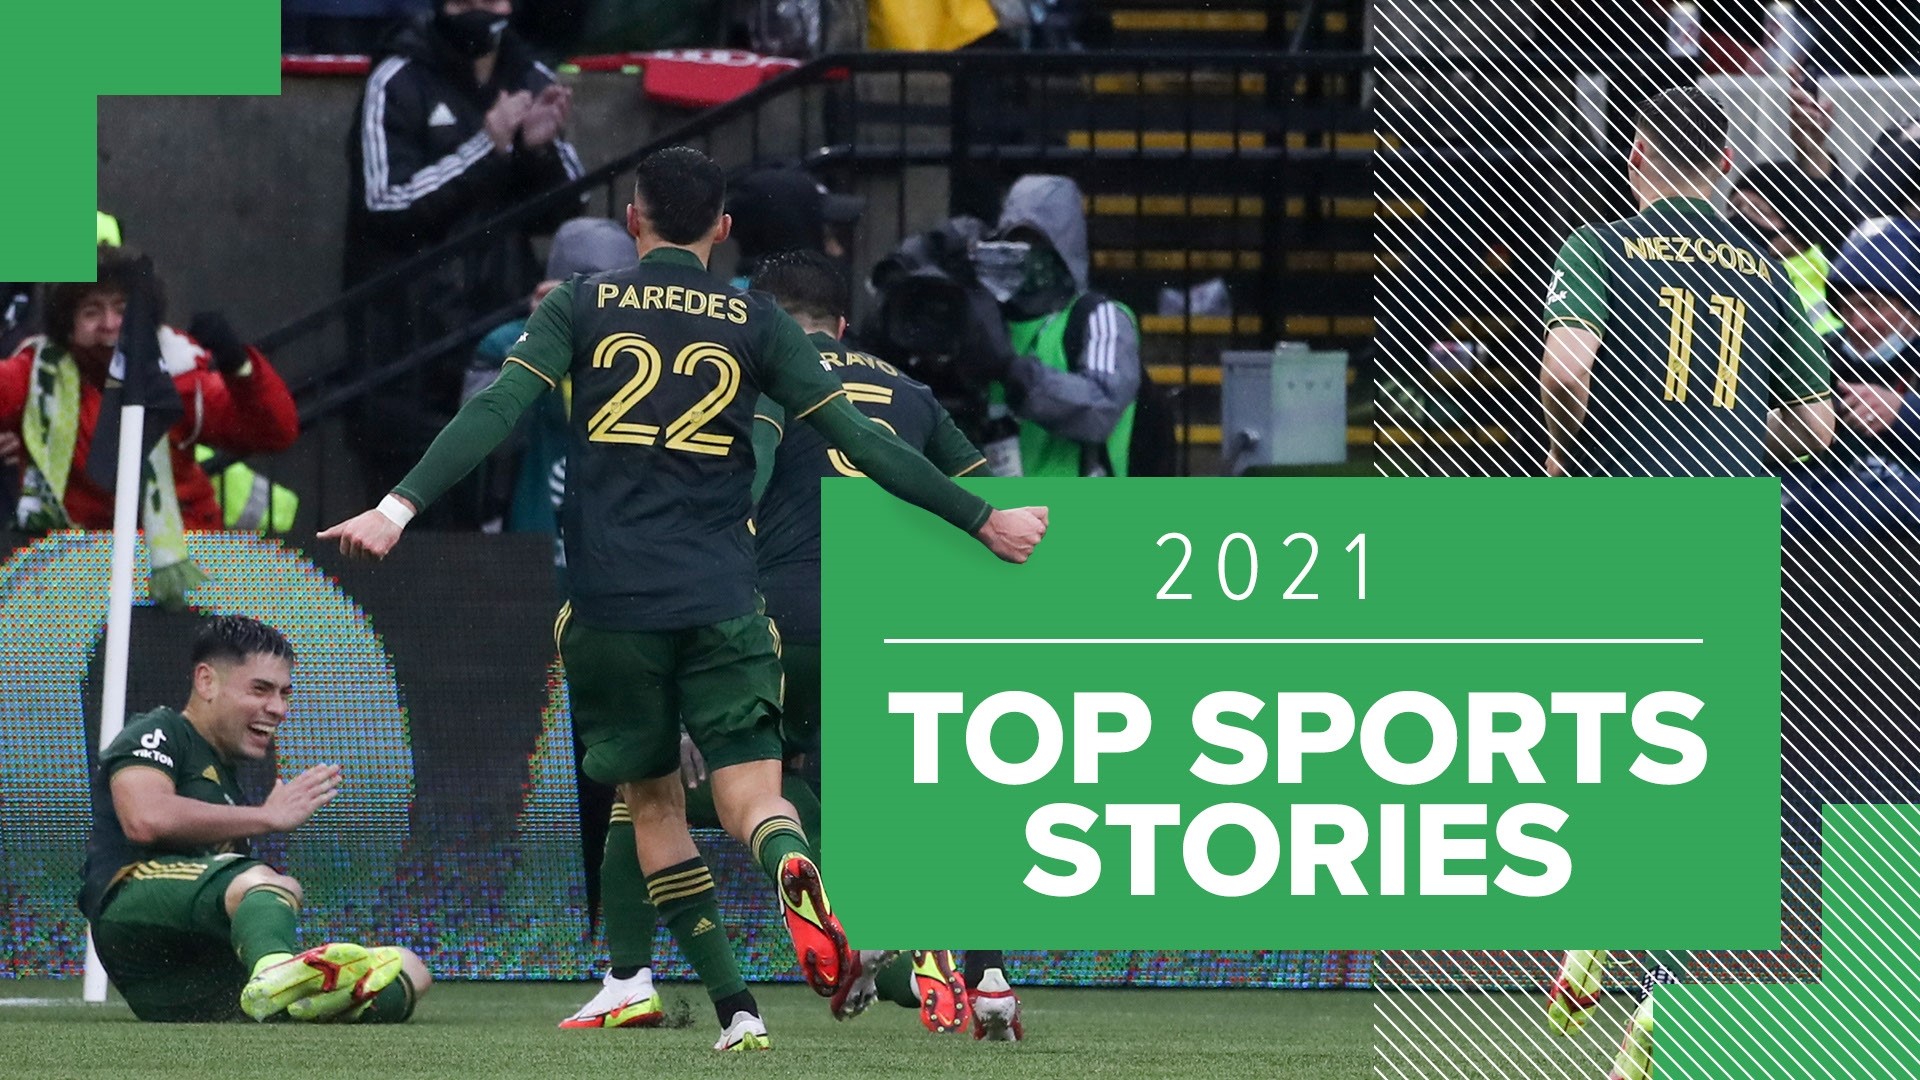 Here's a look at the top sports stories for fans in the Portland metro area for 2021, as determined by the KGW News staff and KGW readers.